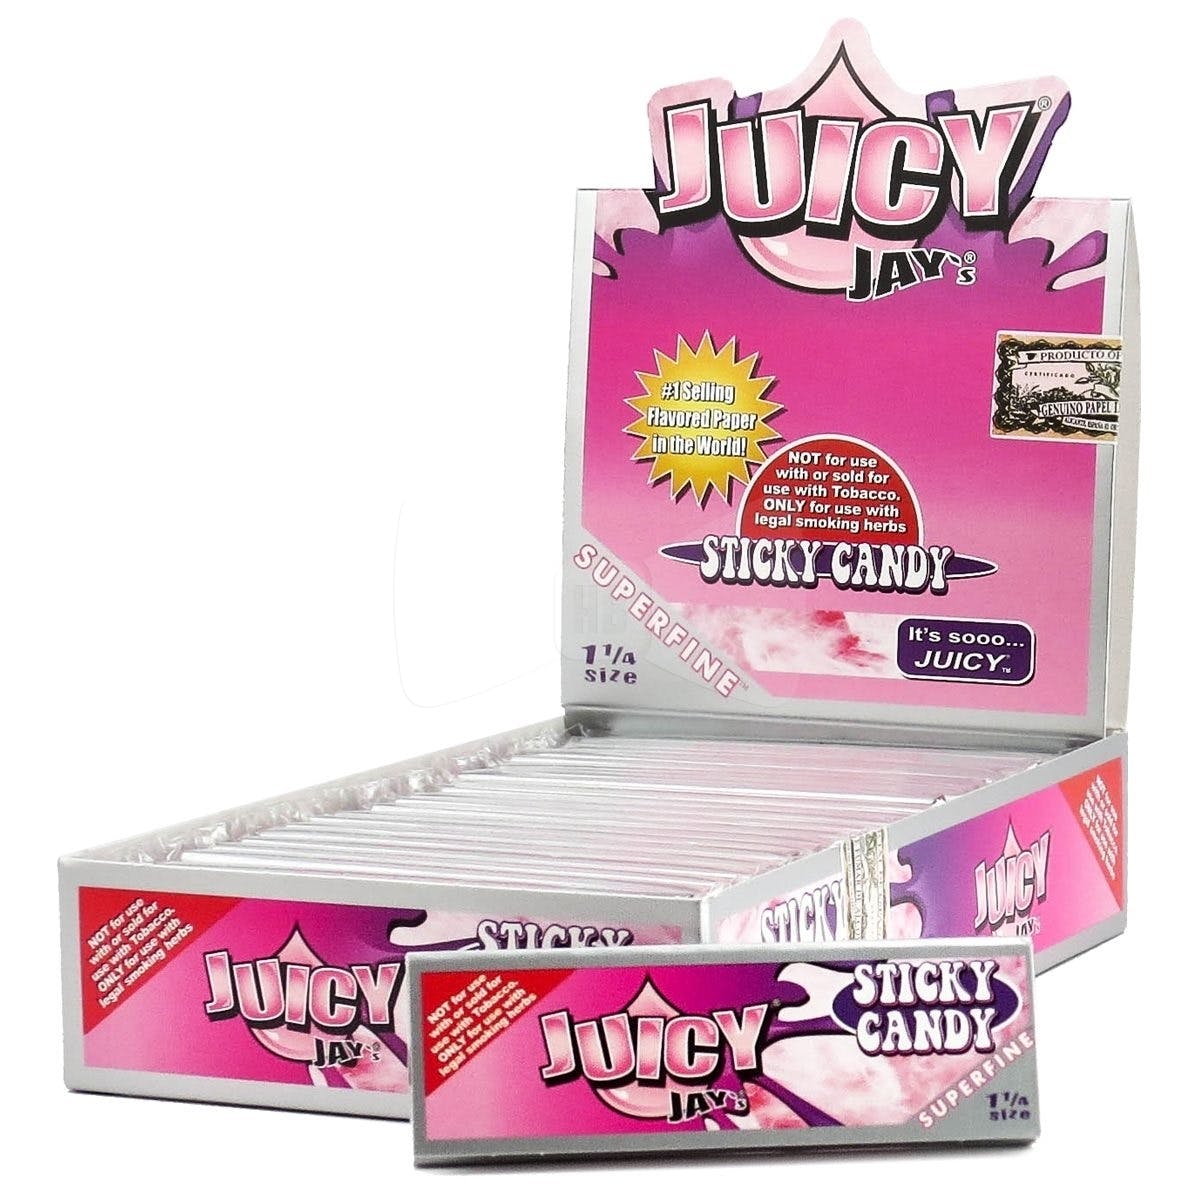 JUICY JAY STICKY CANDY 1 1/4 ROLLING PAPERS